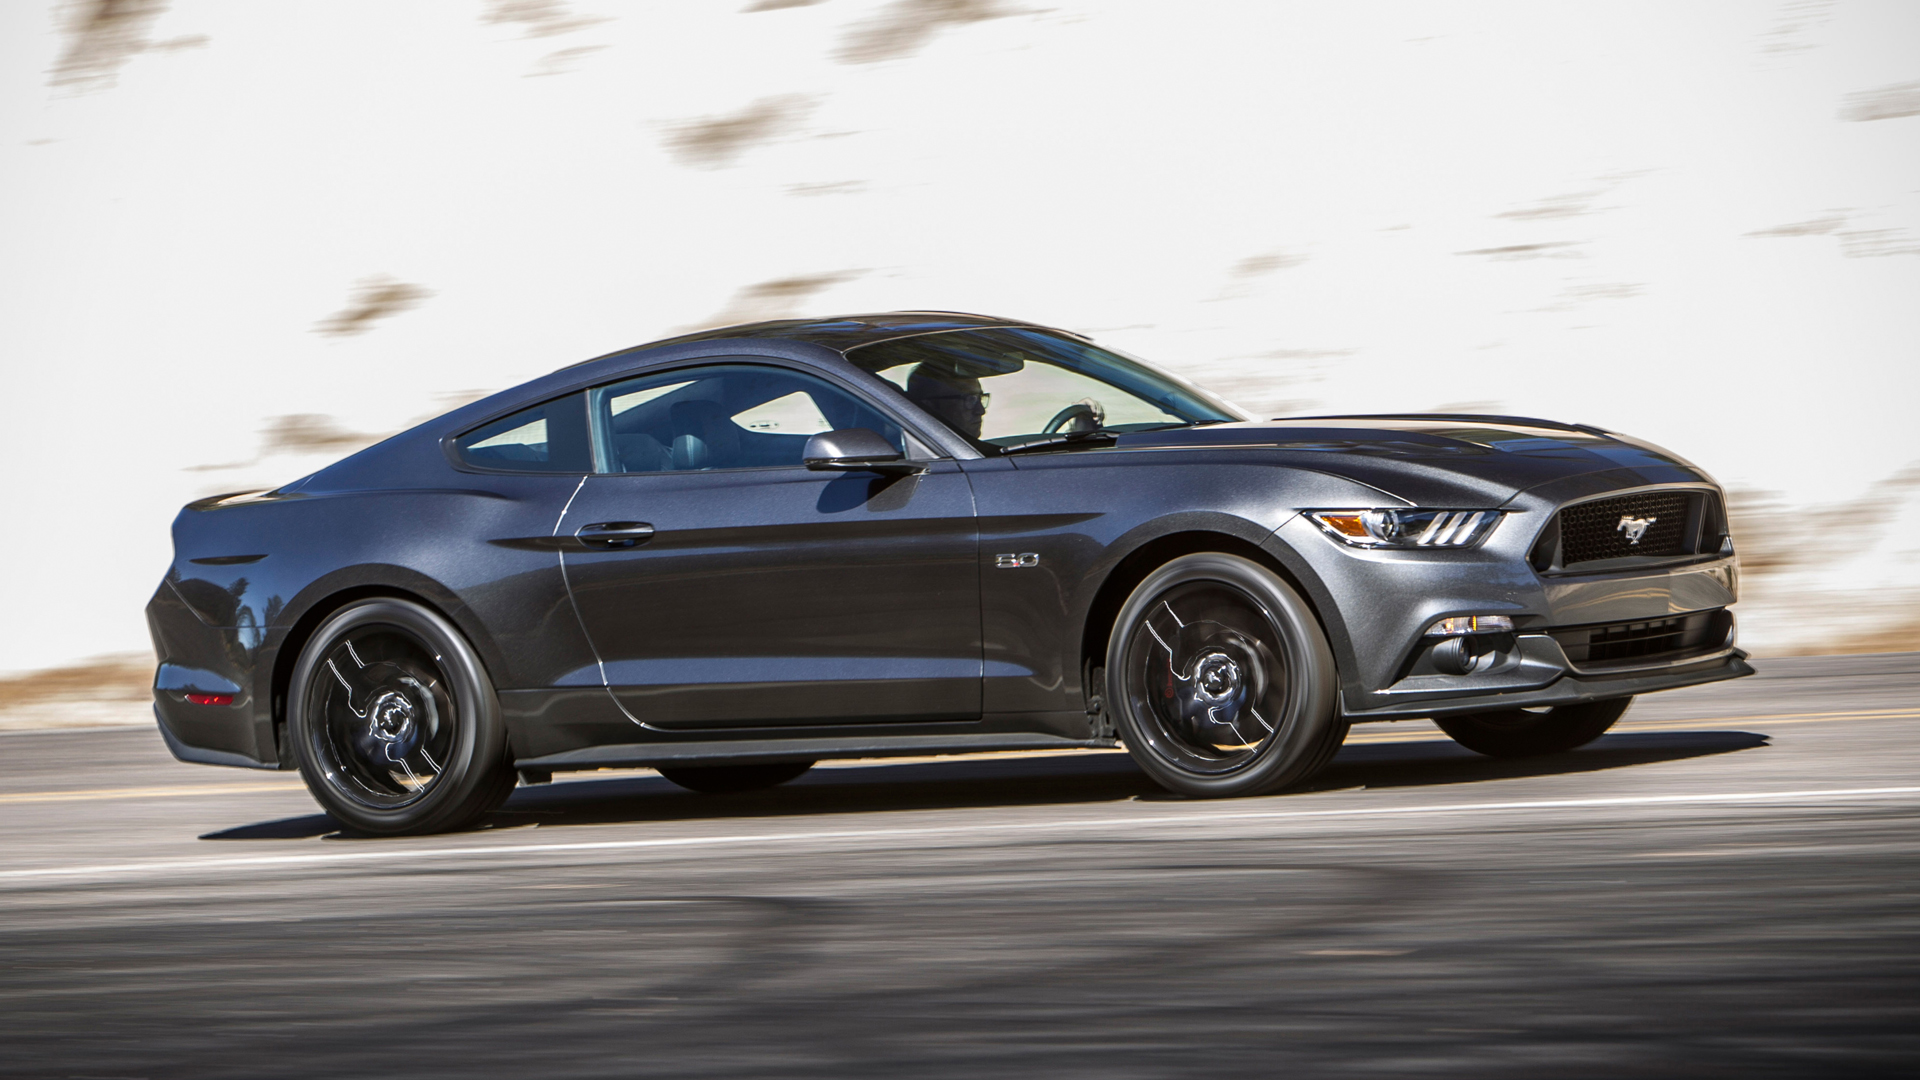 Free download Mustang GT 2015 Wallpaper Ford Mustang GT 2015 Photo Ford Mustang [1920x1080] for your Desktop, Mobile & Tablet. Explore 2015 Mustang Wallpaper Mustang Gt Wallpaper, Ford